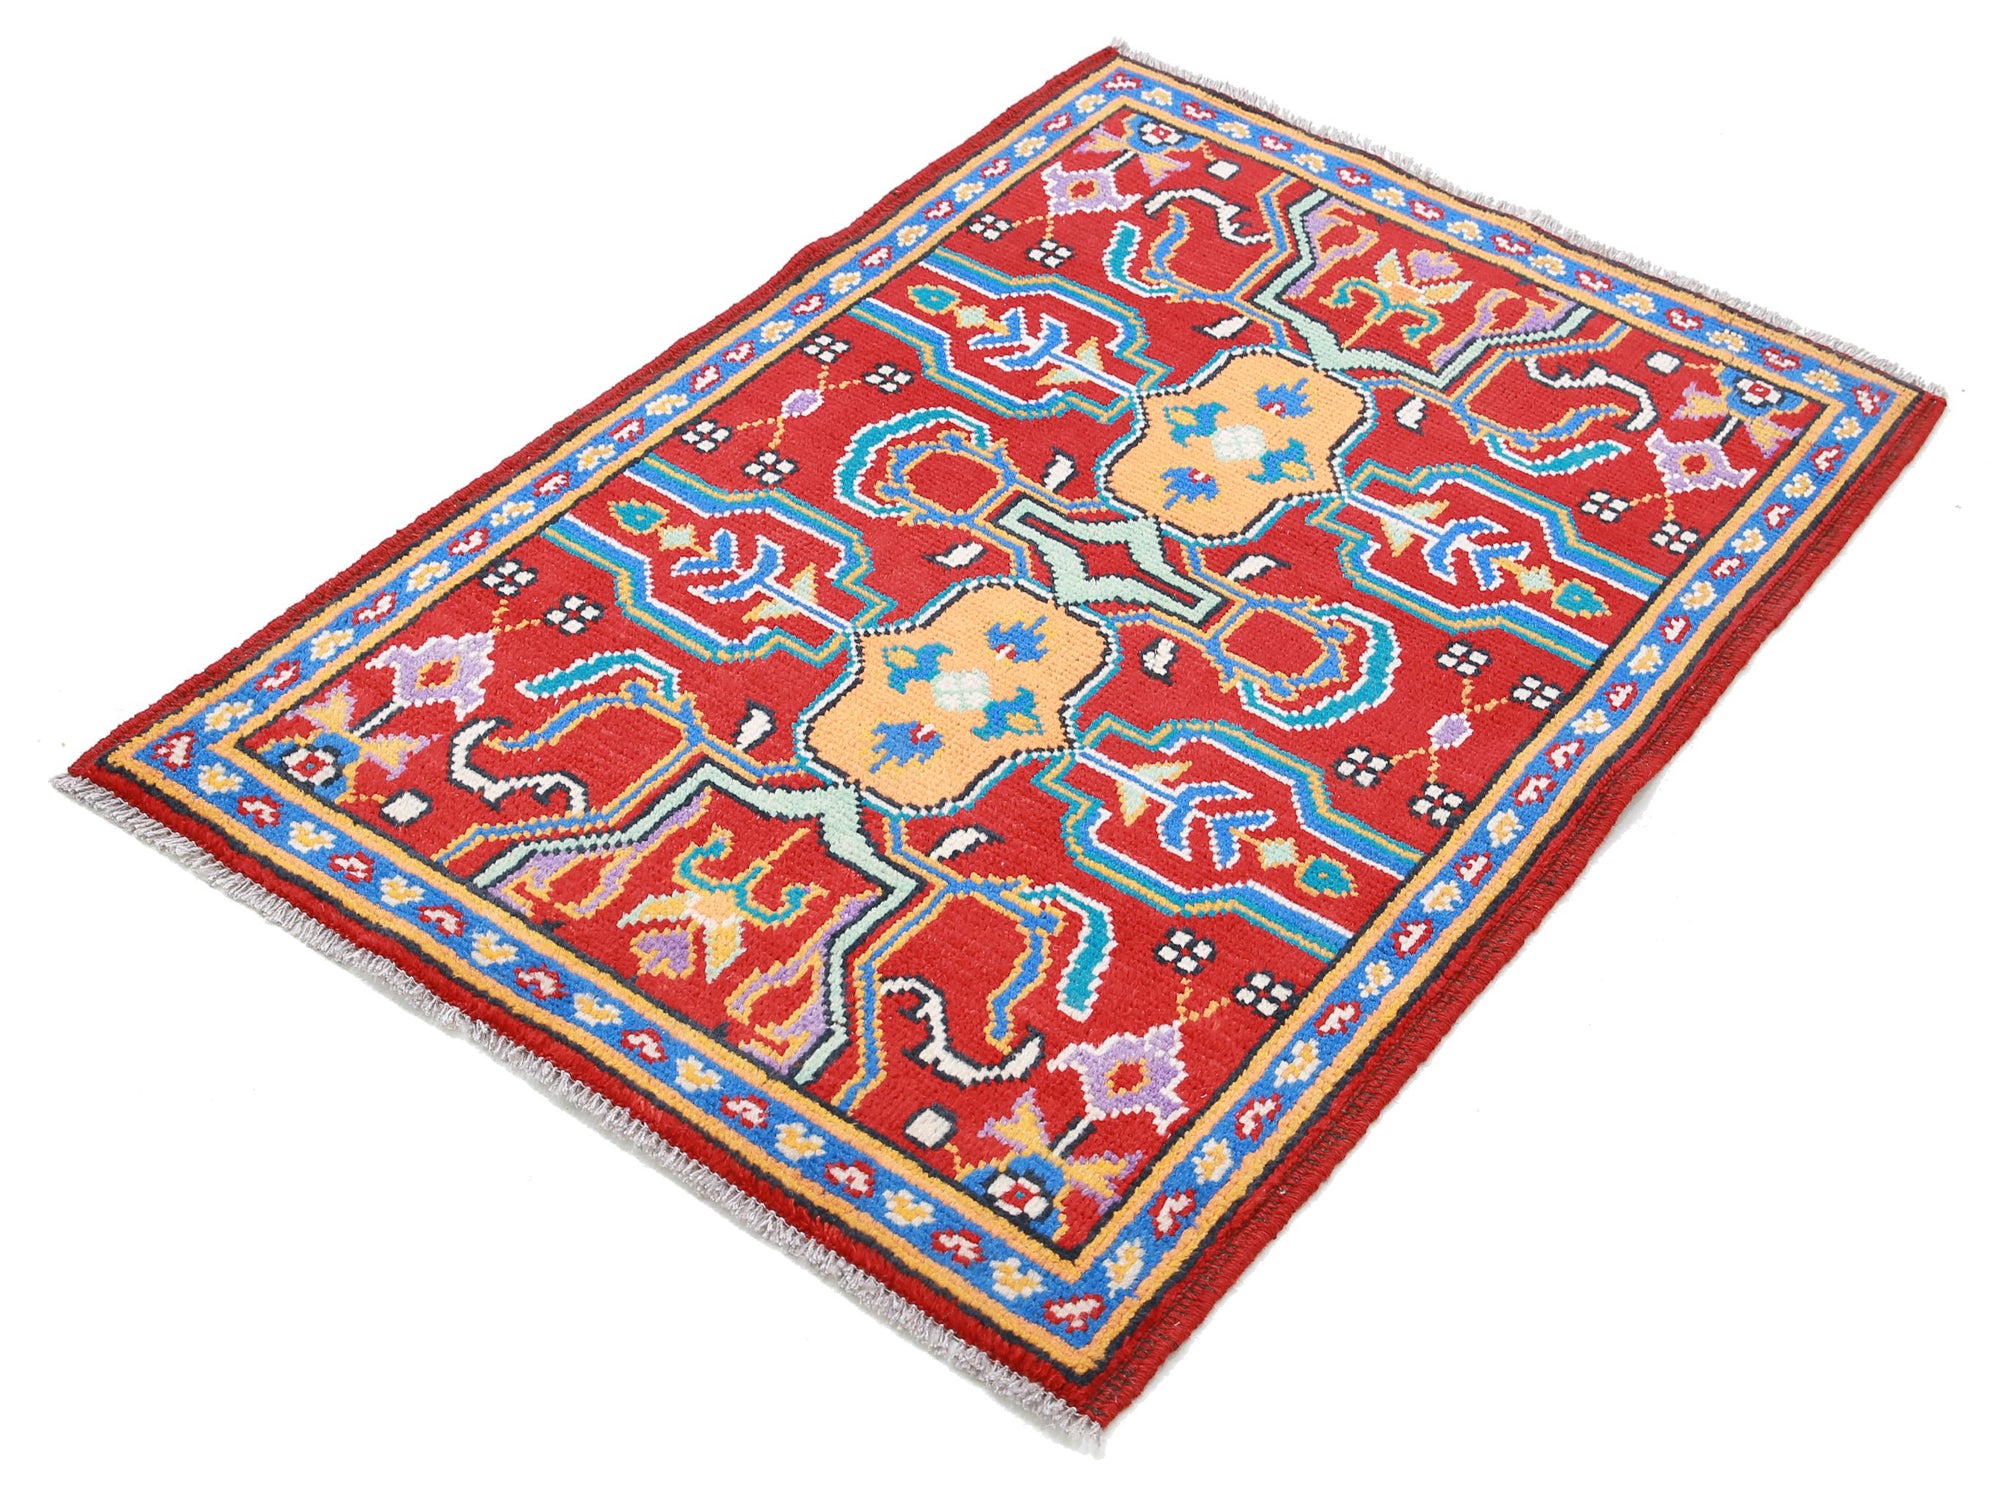 Revival-hand-knotted-qarghani-wool-rug-5014192-2.jpg